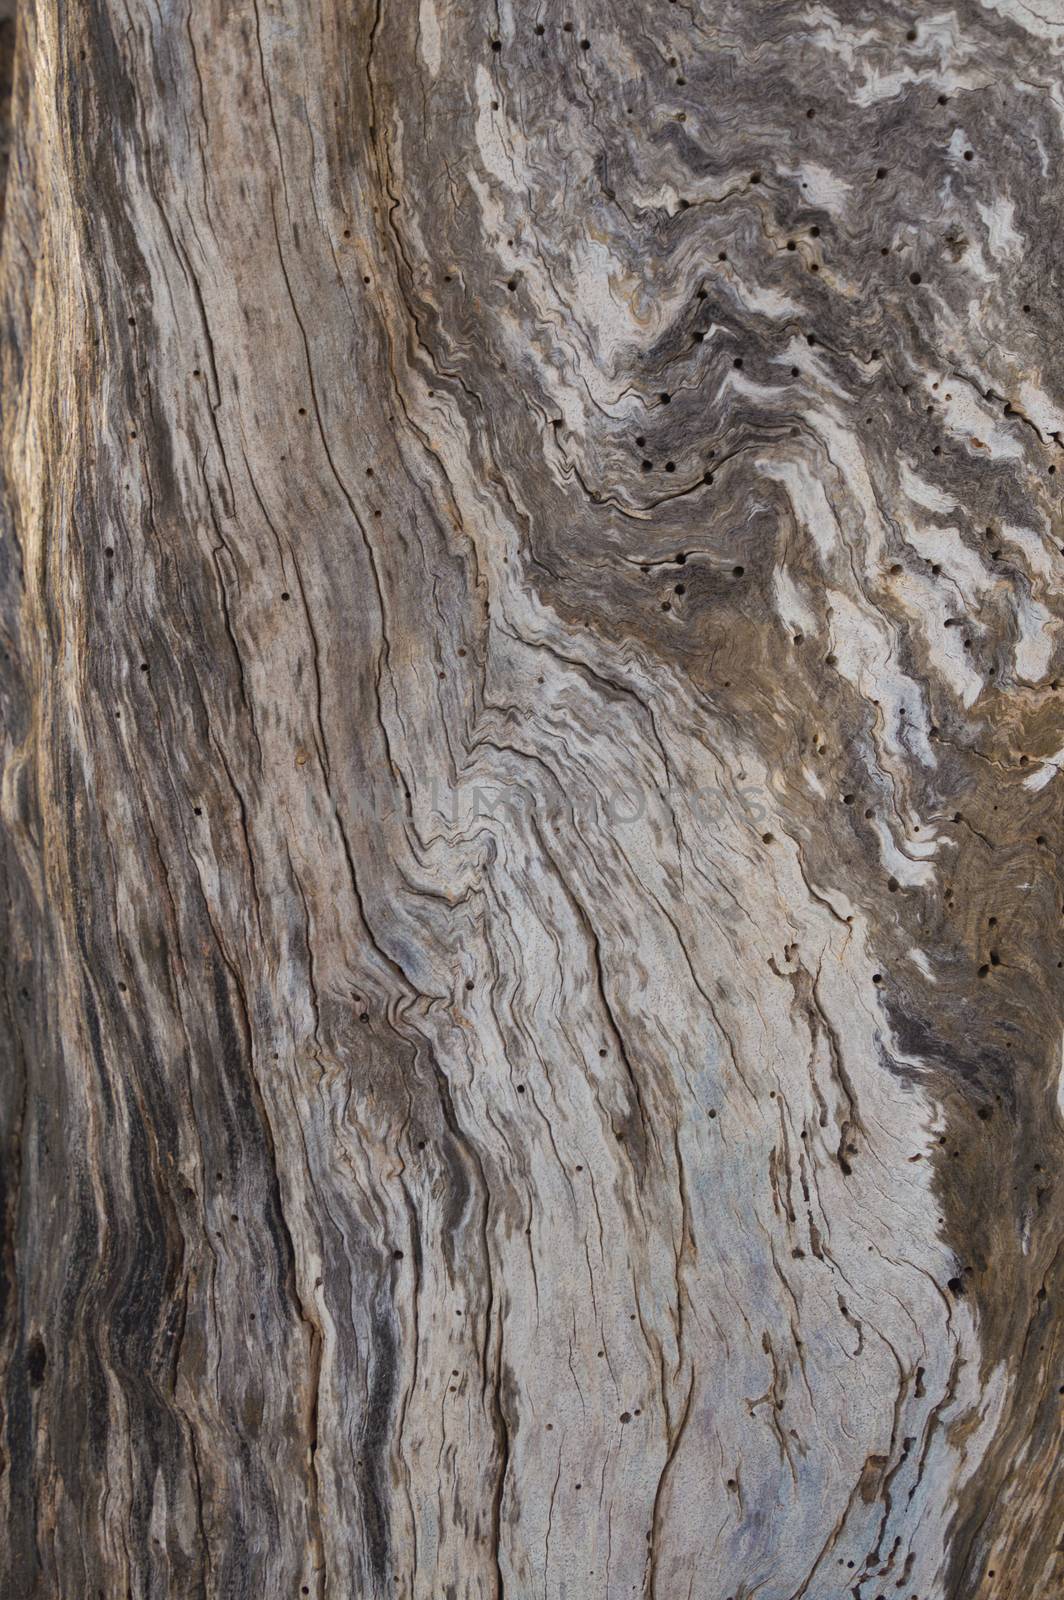 Abstract dead apple tree trunk bark swirl pattern with dead wood and wood grain swirls and woodworm holes.